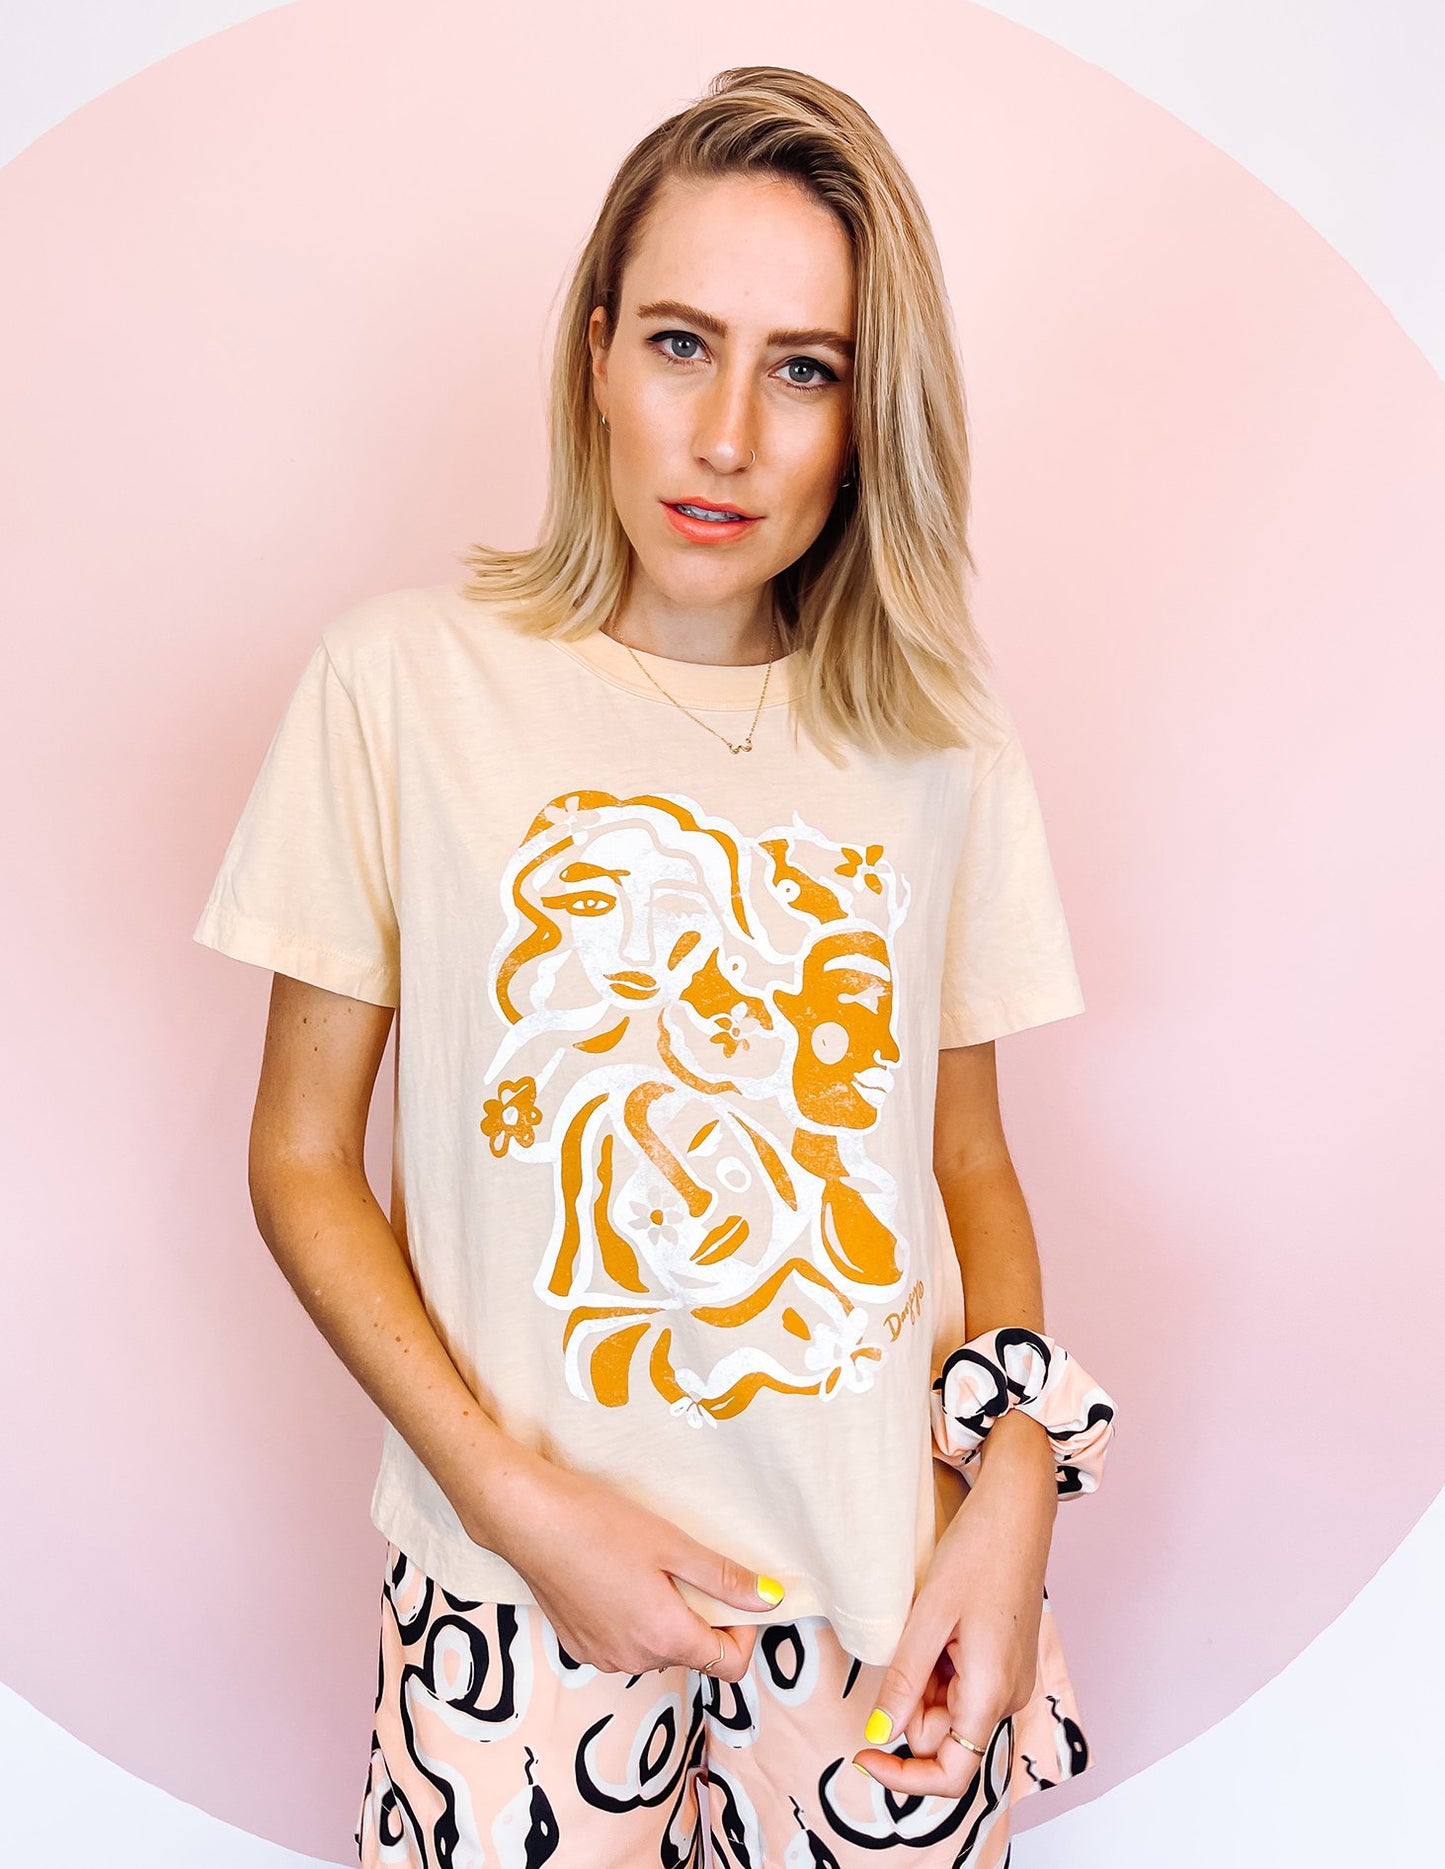 A woman wearing white t-shirt with an orange and white abstract print on, in the shape of faces.